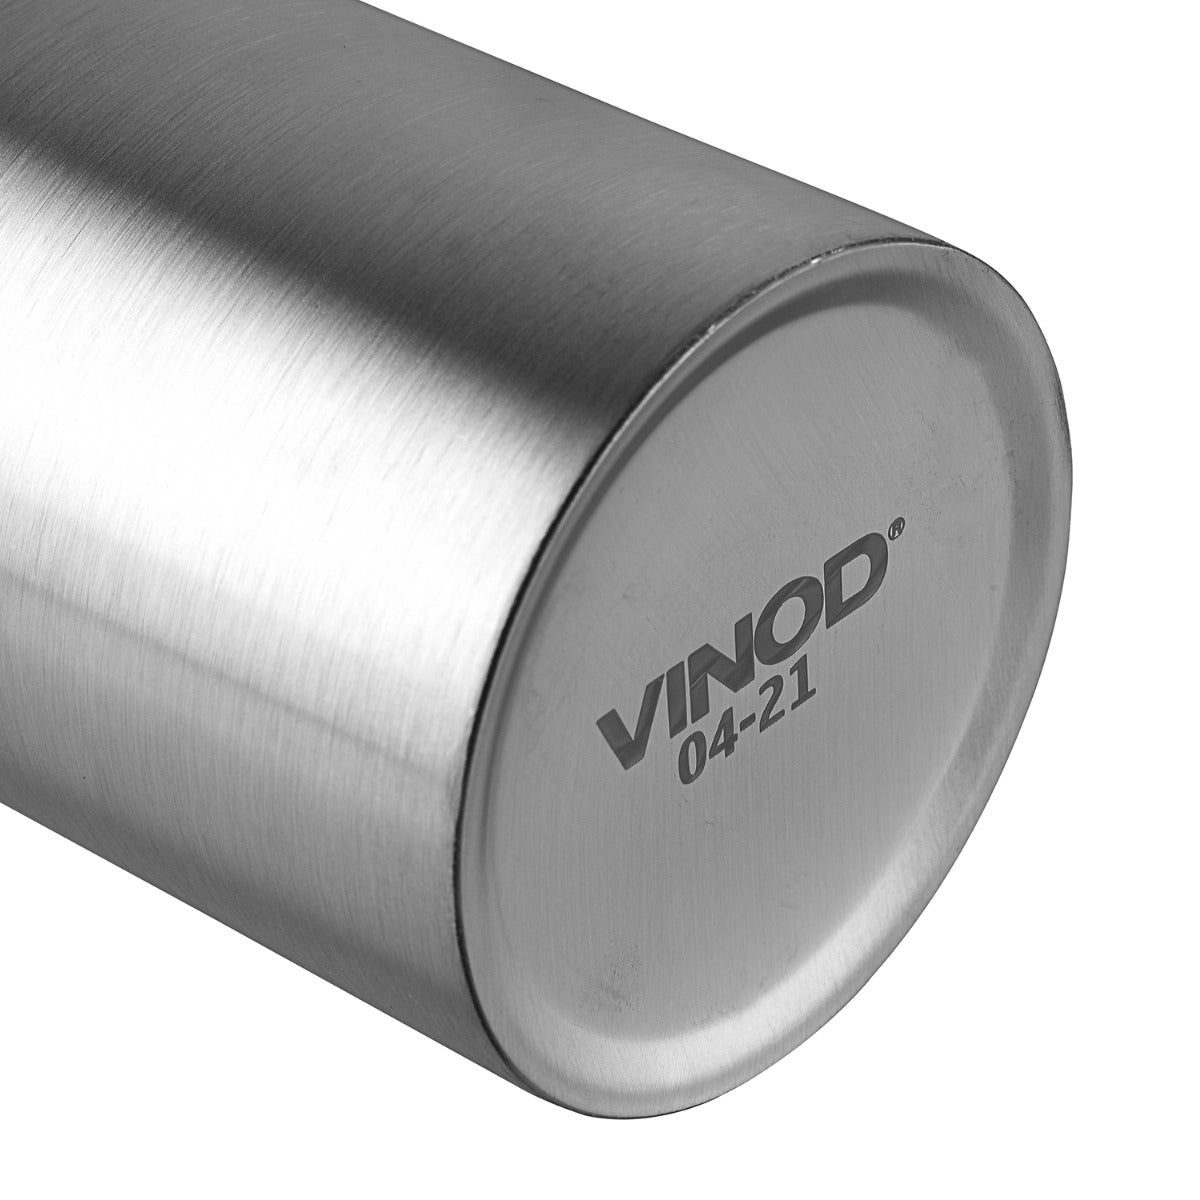 Vinod Frost Fridge Water Bottle with Fabricated 18/8 Stainless Steel Coa